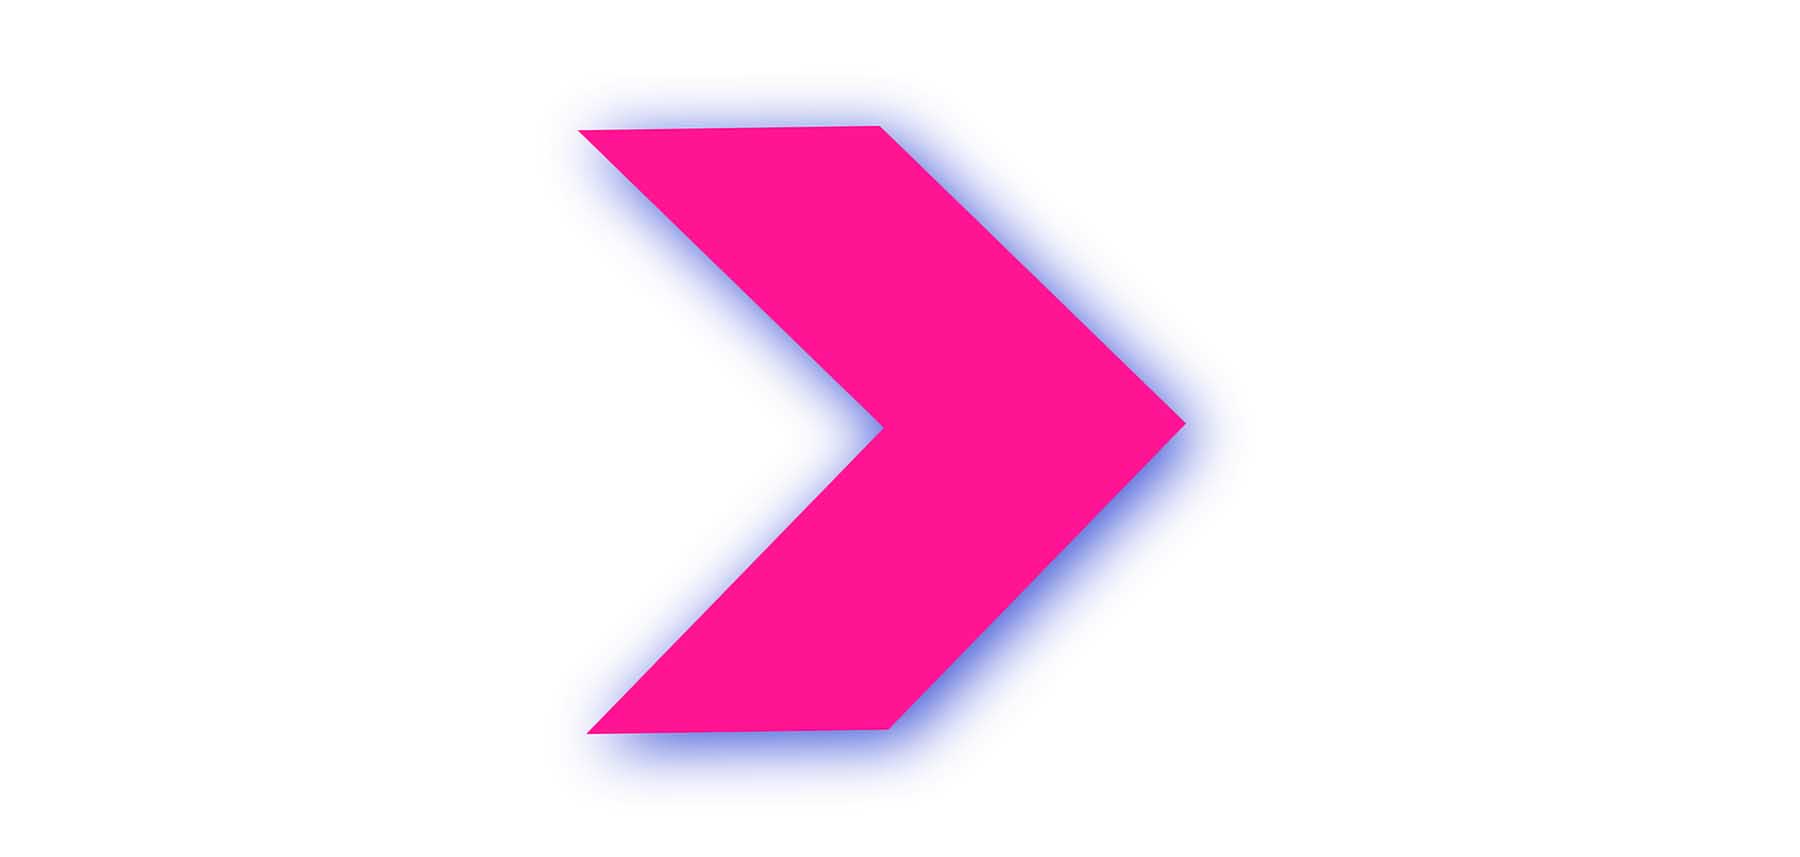 Pink chevron shape with blue drop-shadow